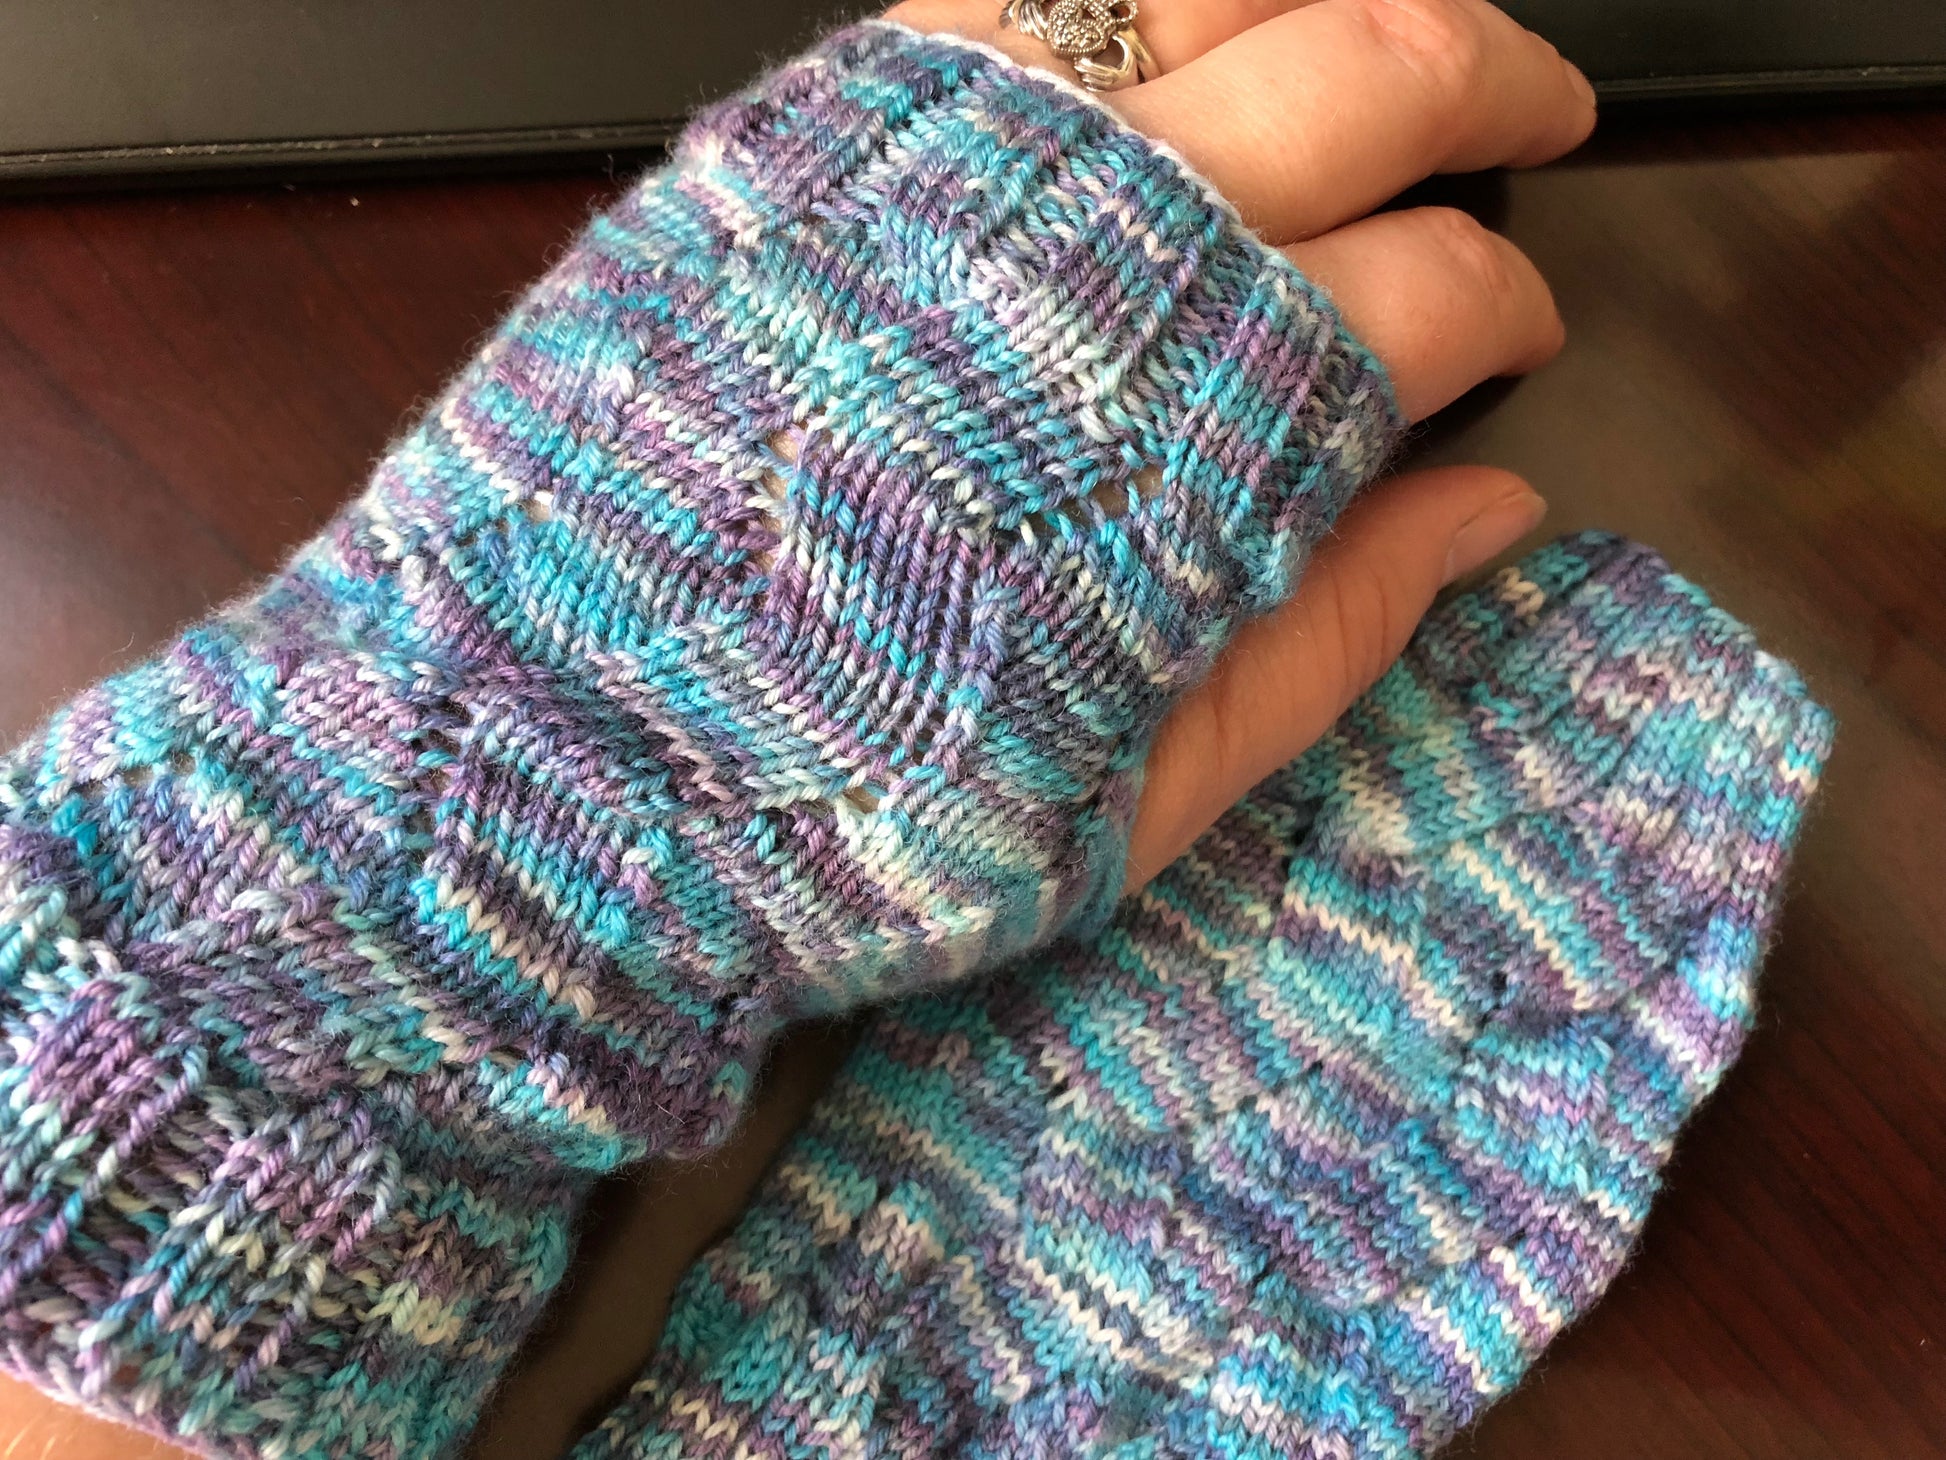 Rebel Purl knit into fingerless mitts